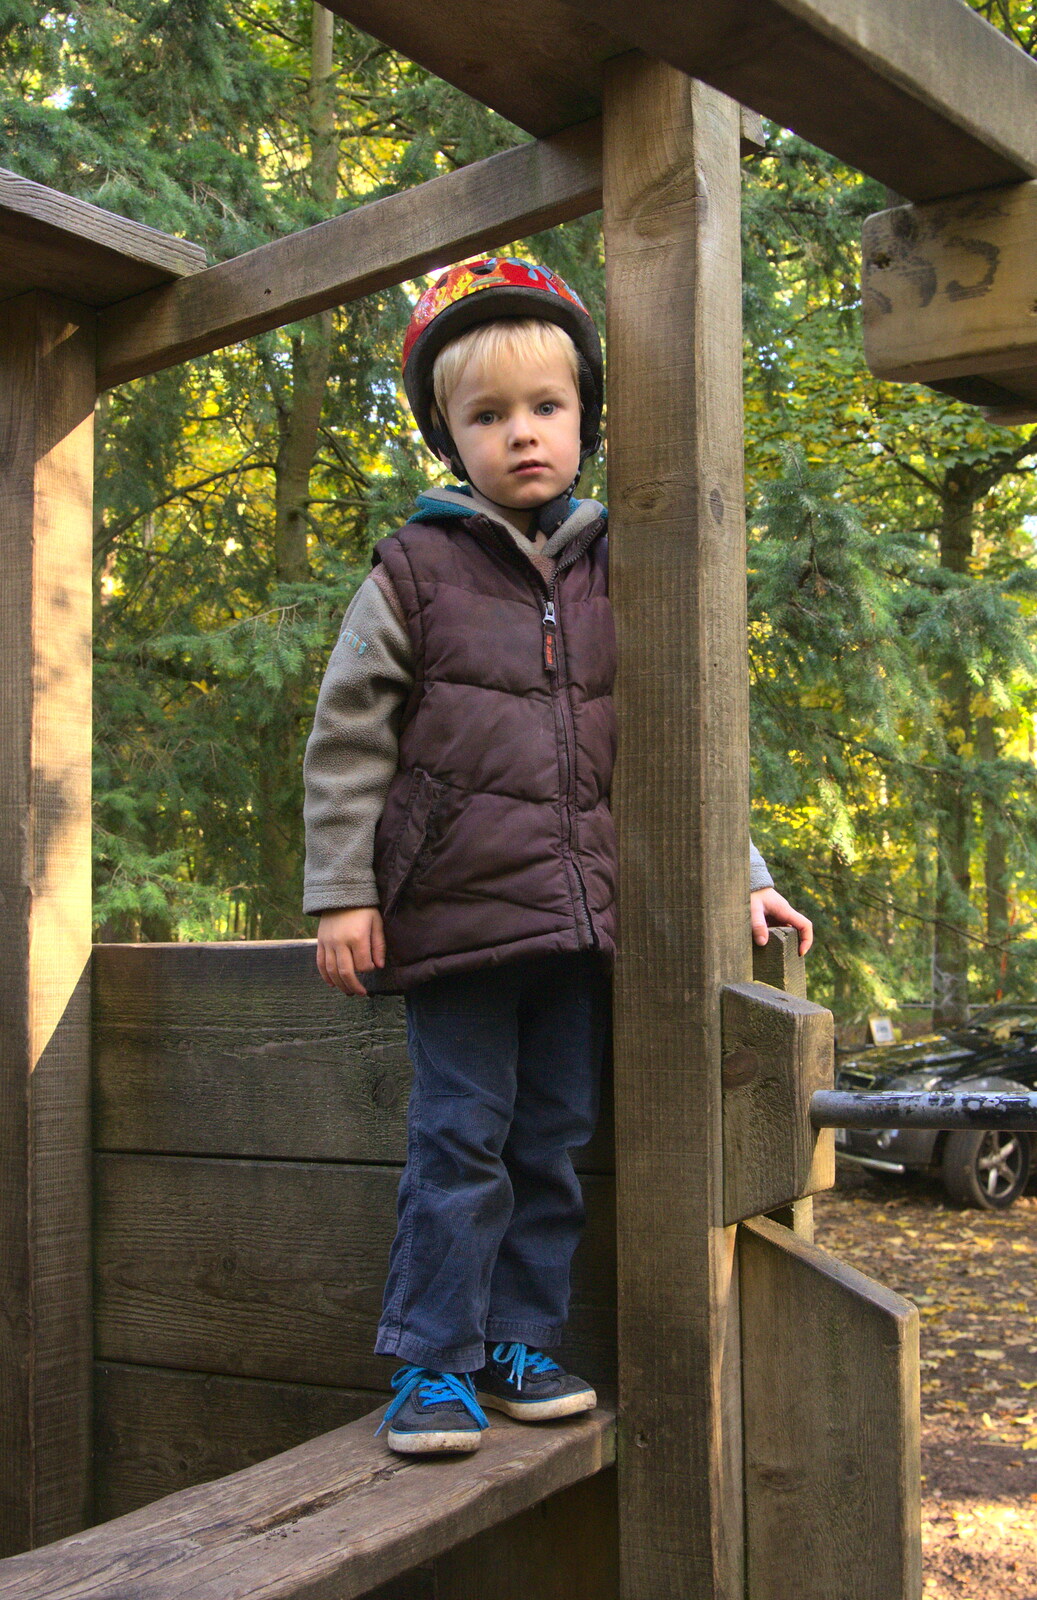 Harry looks sad from A Day at High Lodge, Brandon Forest, Suffolk - 26th October 2015